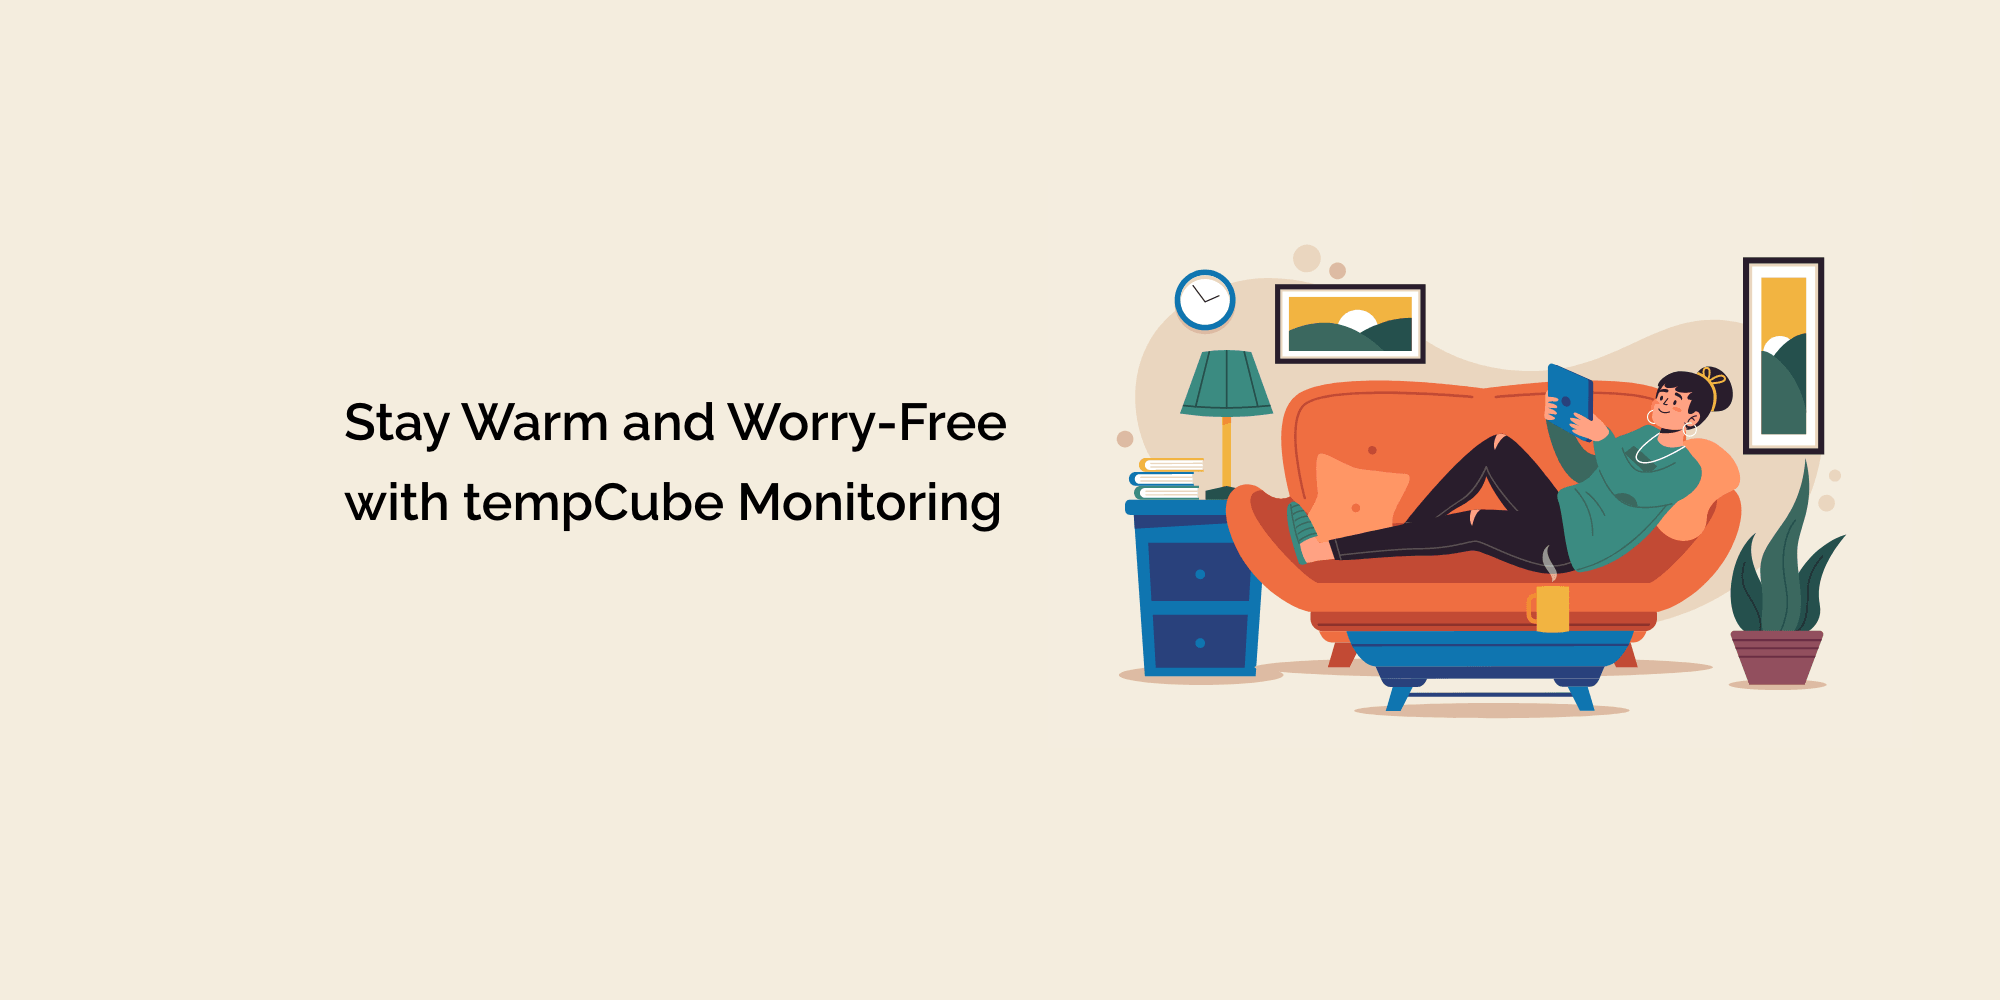 Stay Warm and Worry-Free with tempCube Monitoring